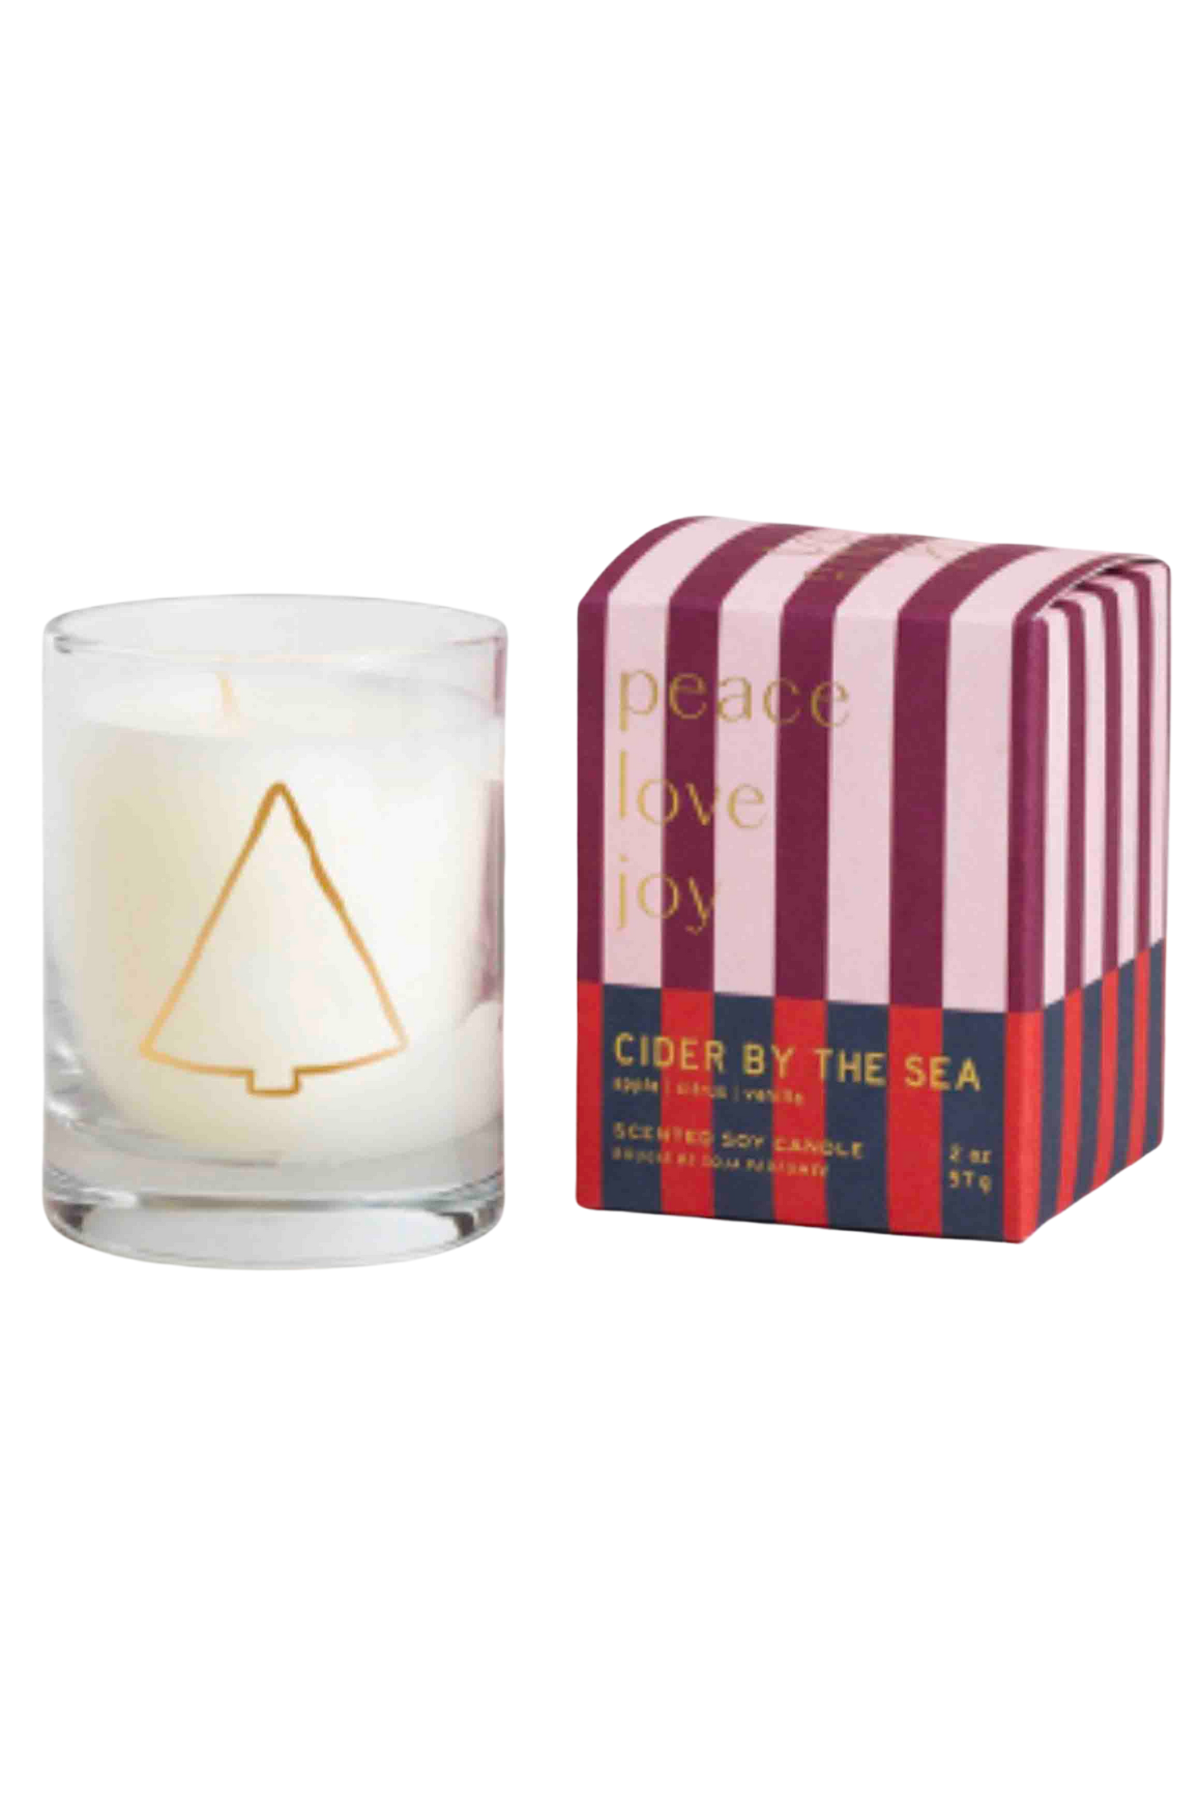 Cider by the Sea Boxed Holiday Votive Scented Soy Candle by Mersea